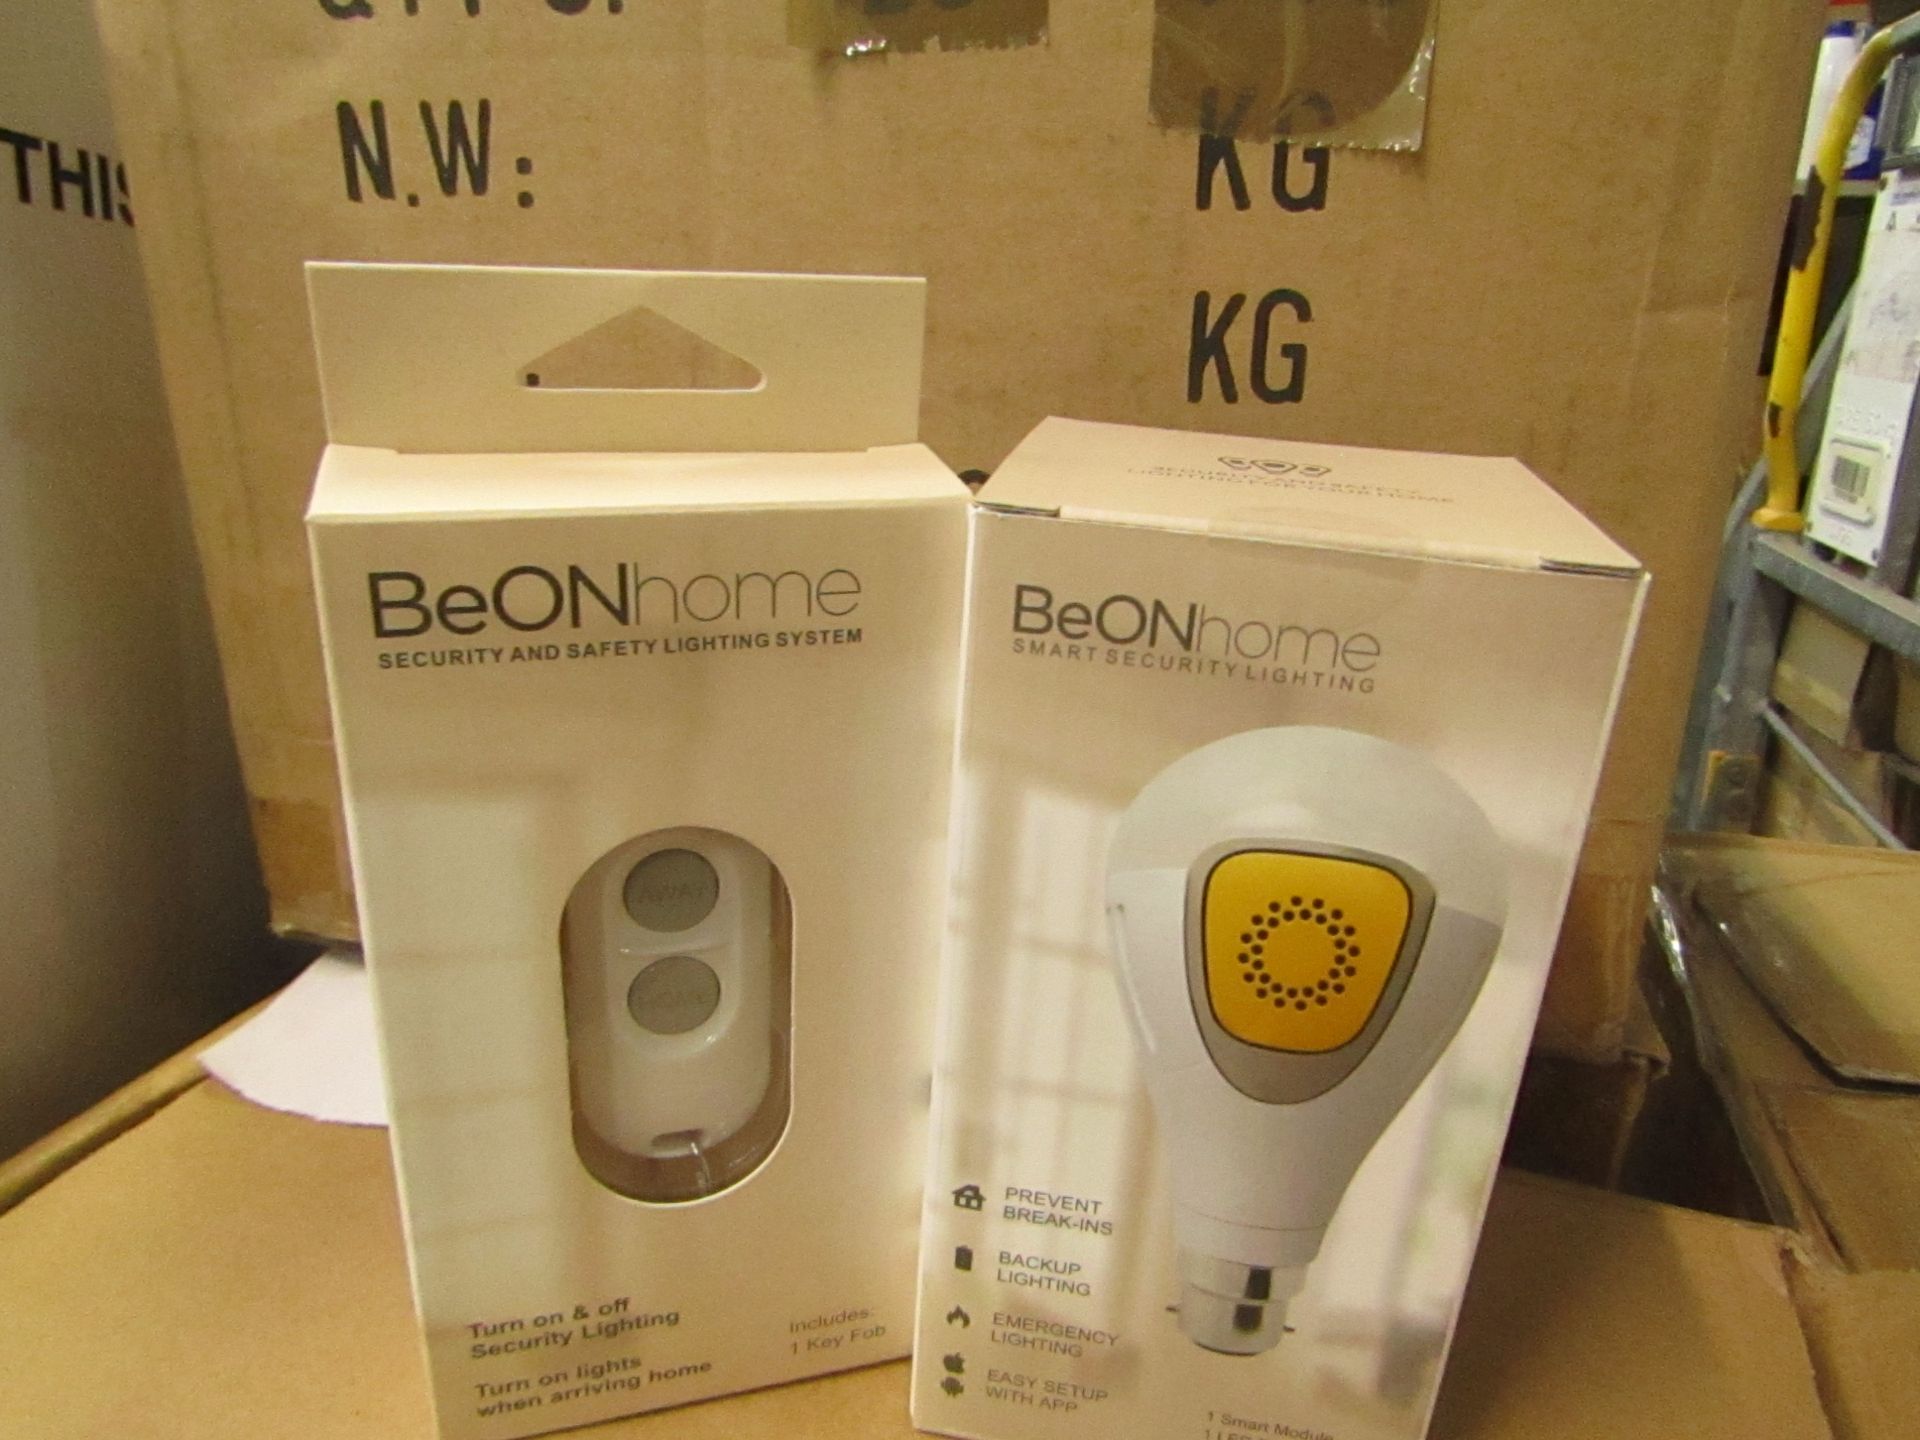 Be on home Smart Security Lighting - comes with Be on home security and safety lighting system - New